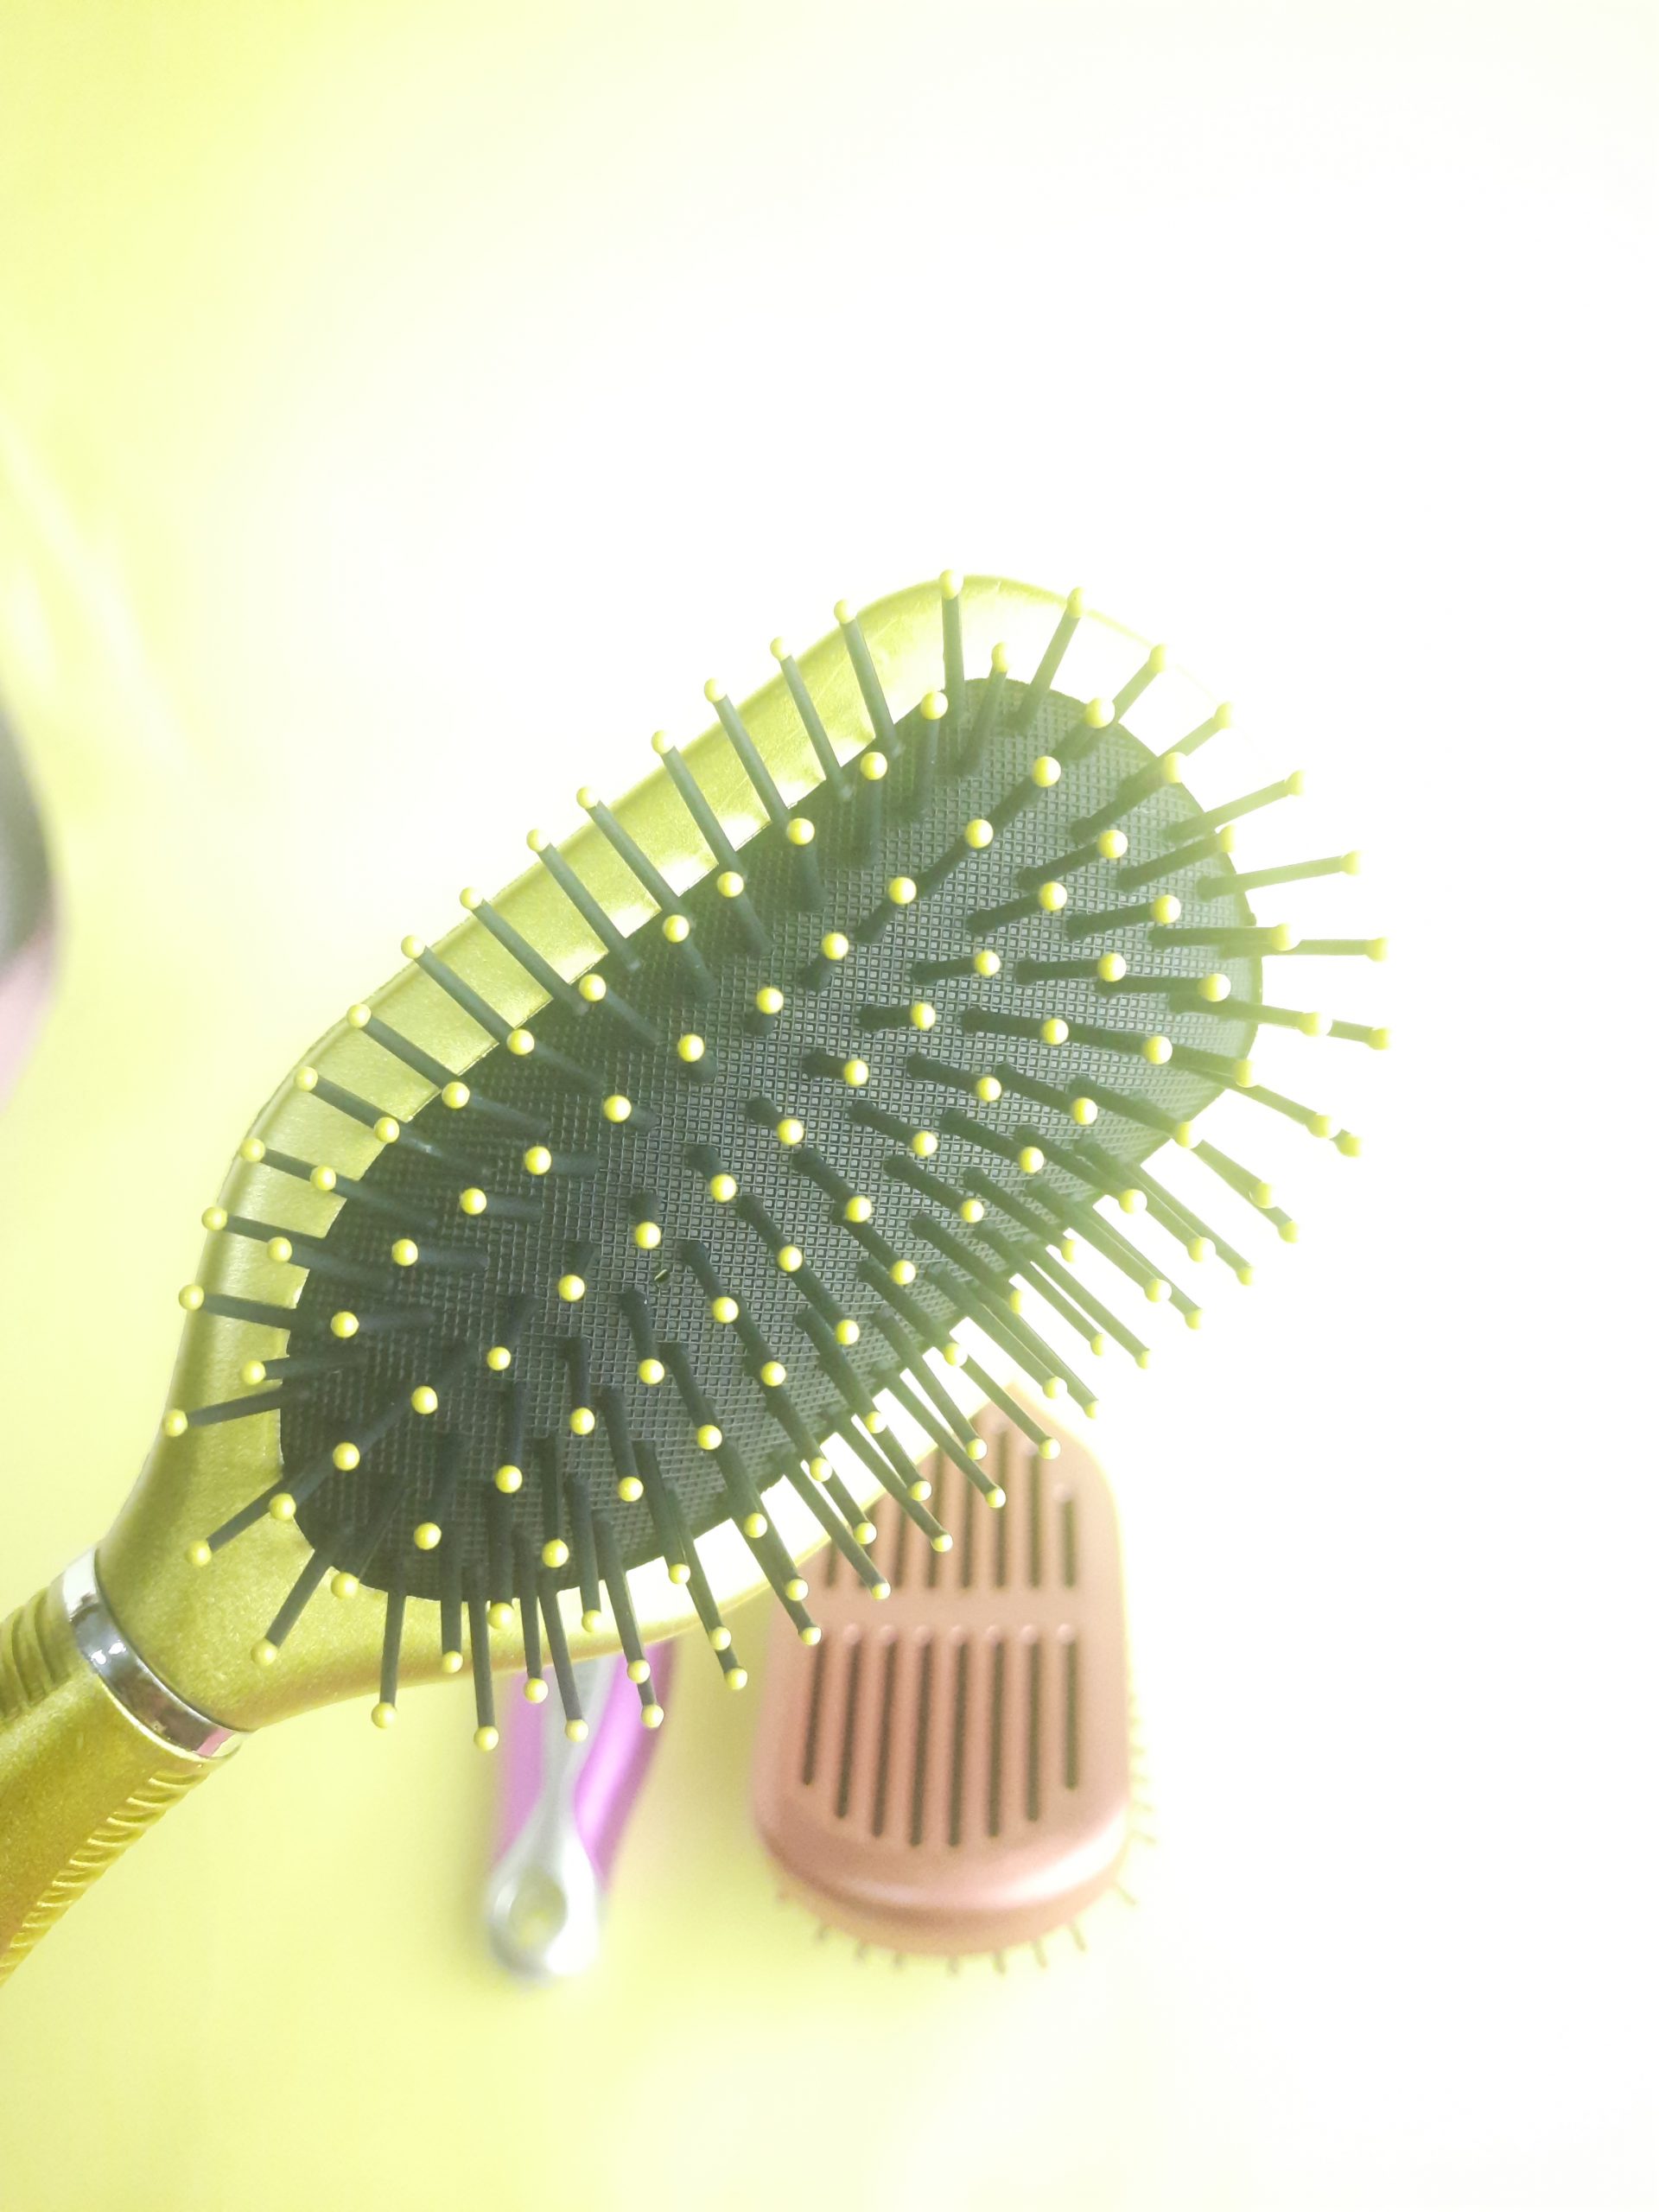 Buy SALON Professional Large Paddle Hair Brush Online From 